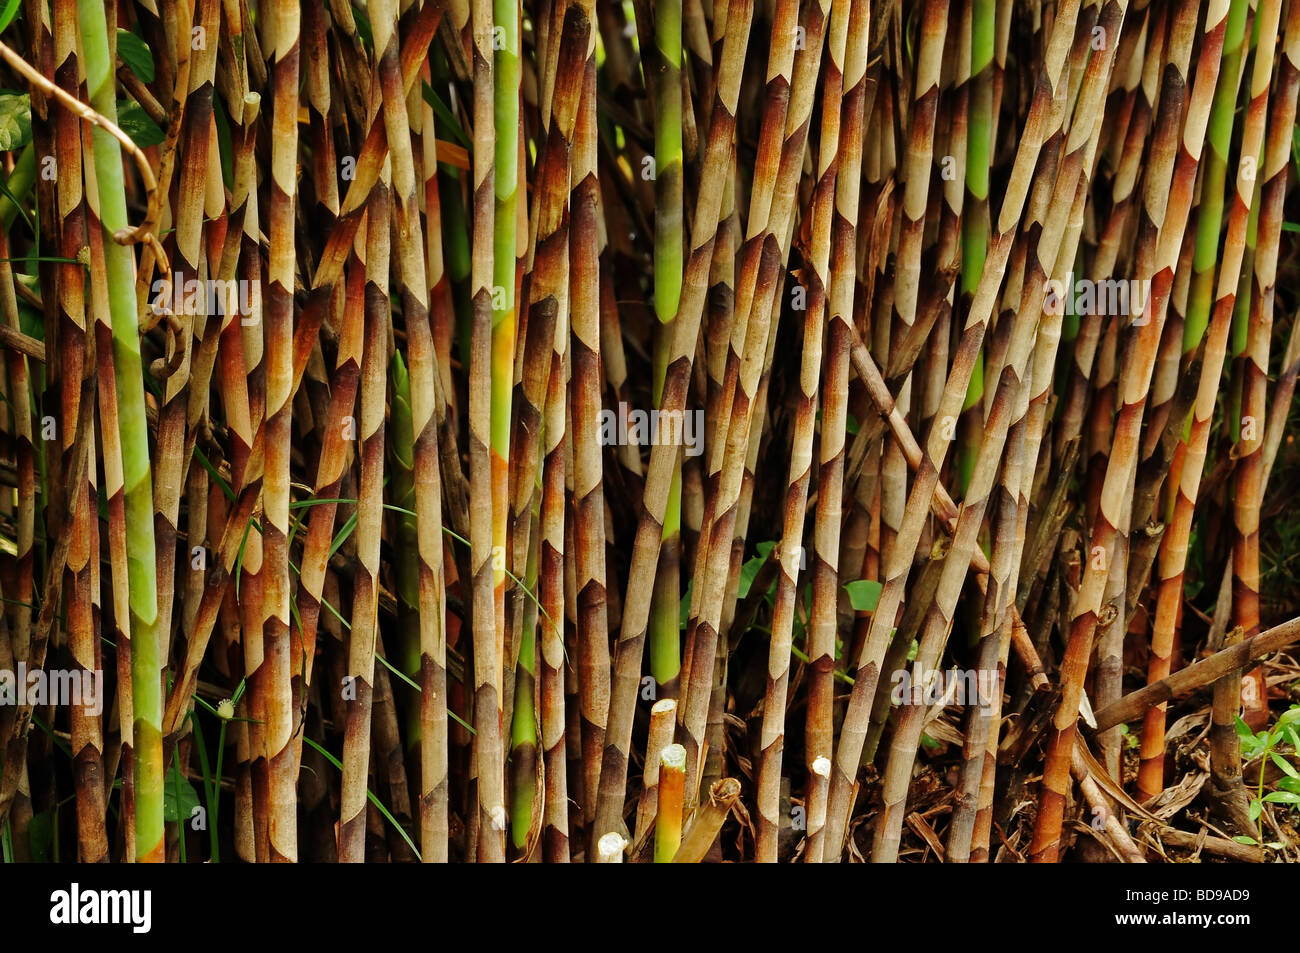 bamboo plant in the parks Stock Photo